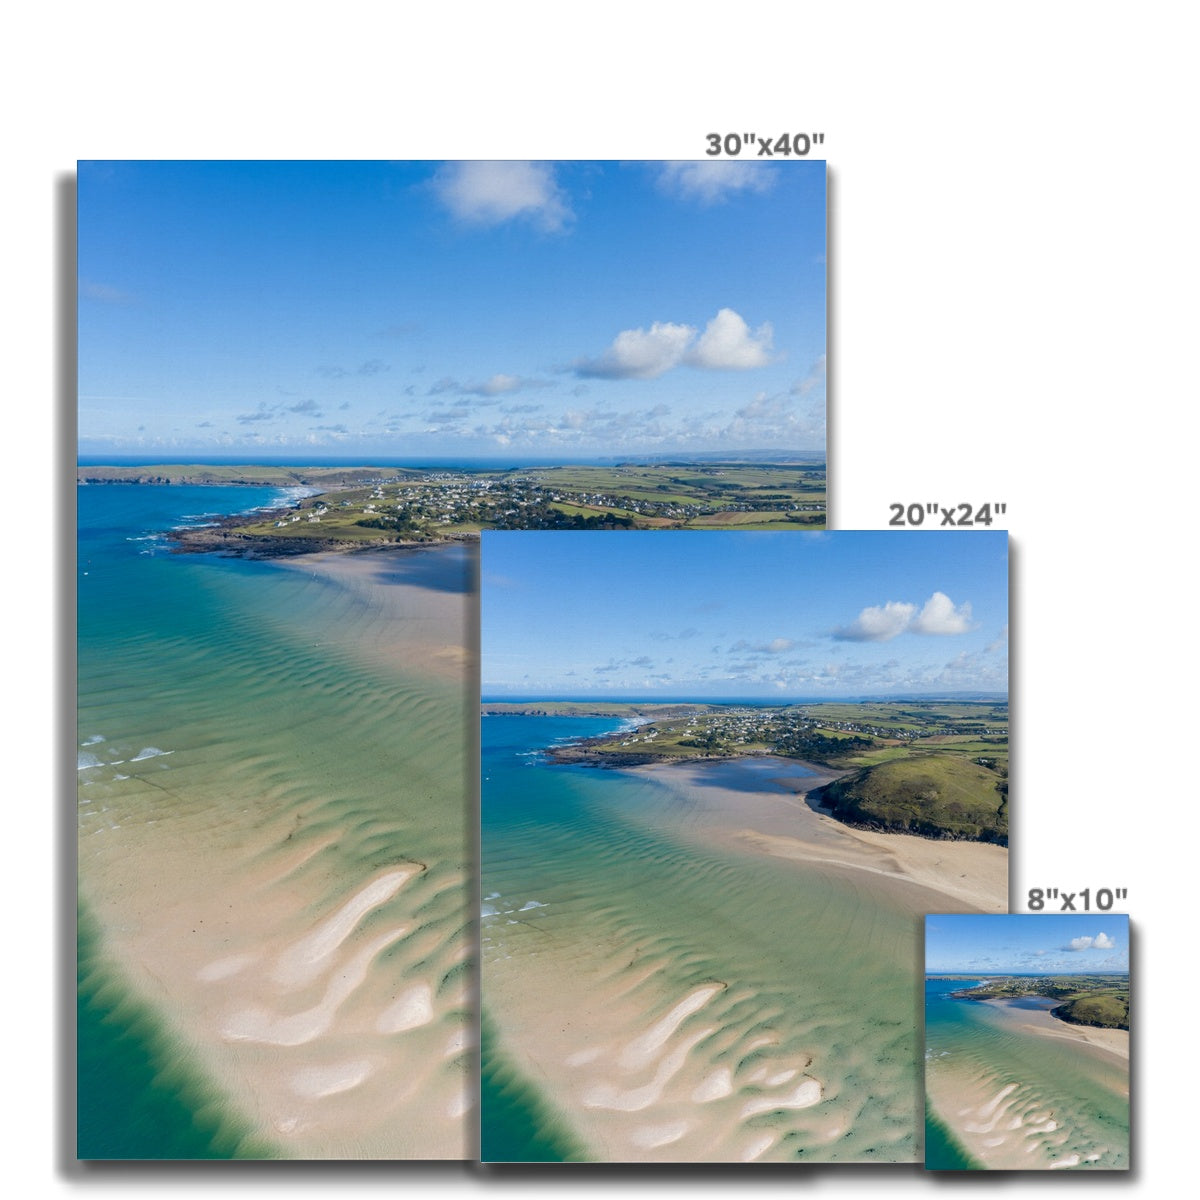 doom bar padstow canvas sizes